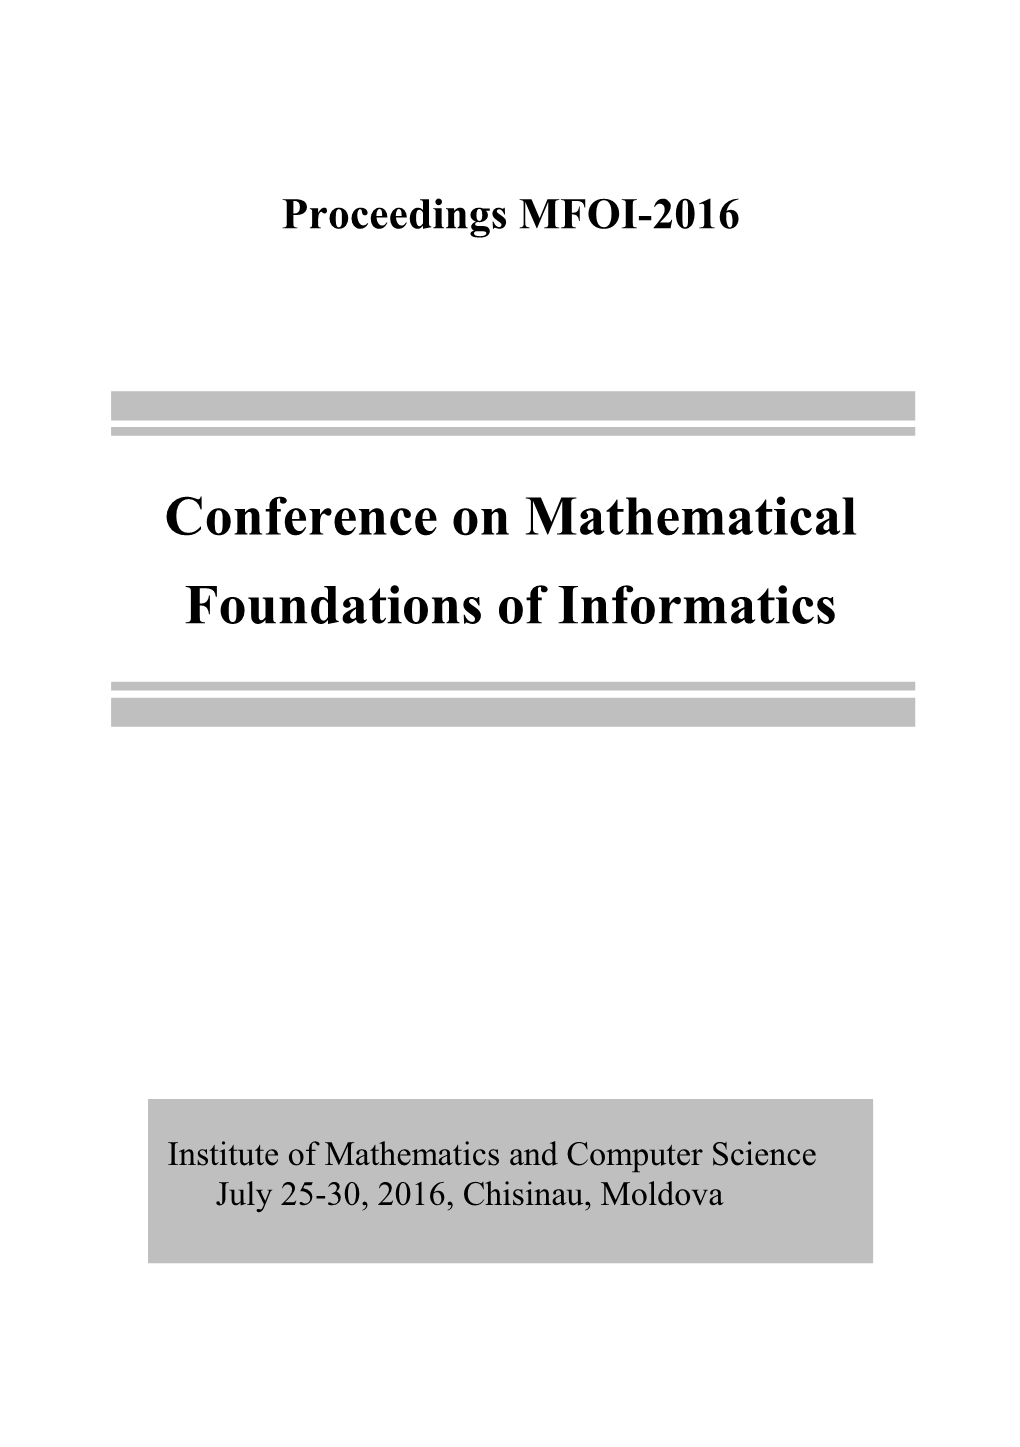 Conference on Mathematical Foundations of Informatics